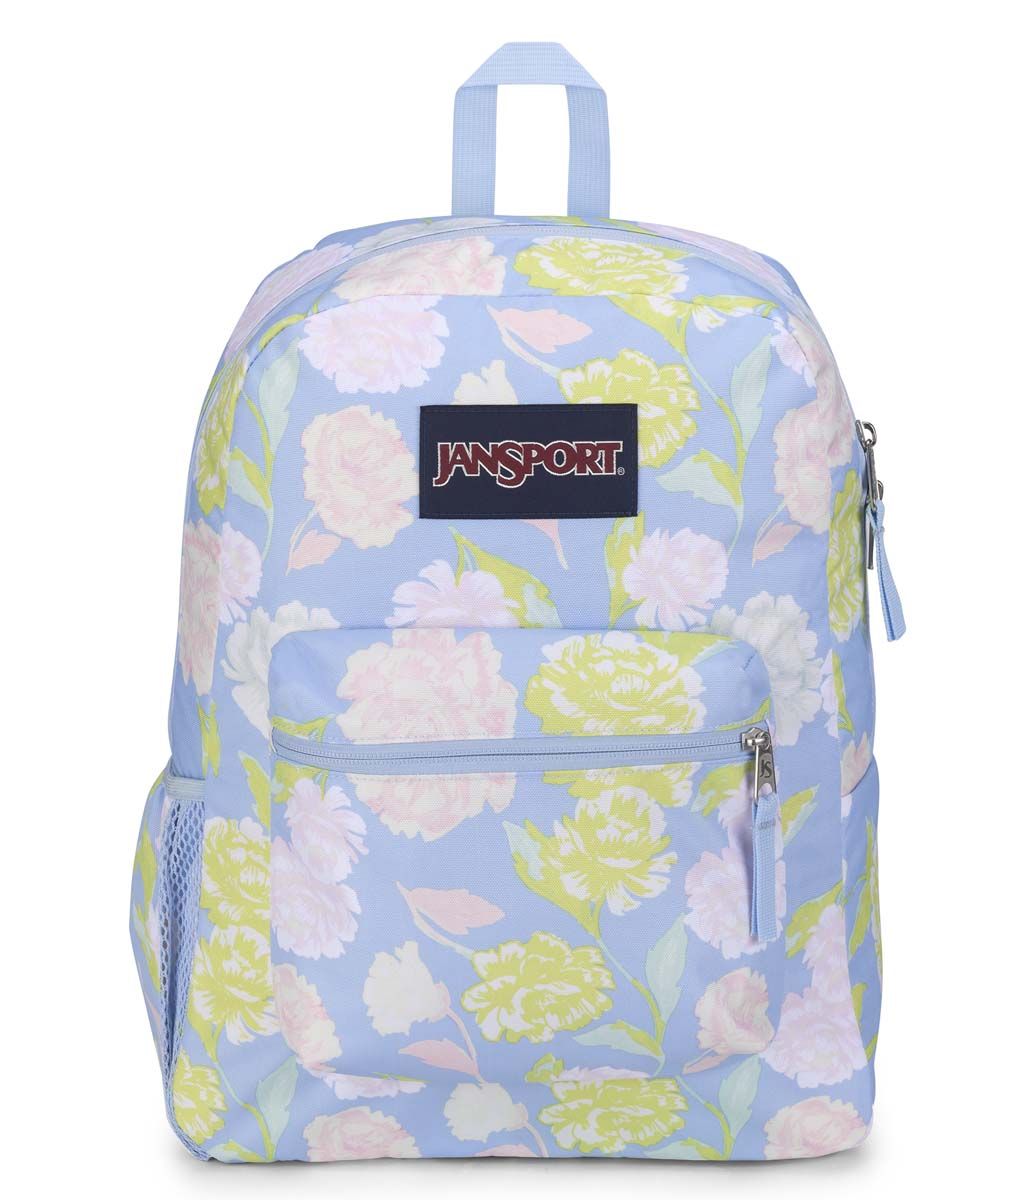 Jansport Cross Town Autumn Tapestry Backpack available at Uniformity, your one-stop back to school shop